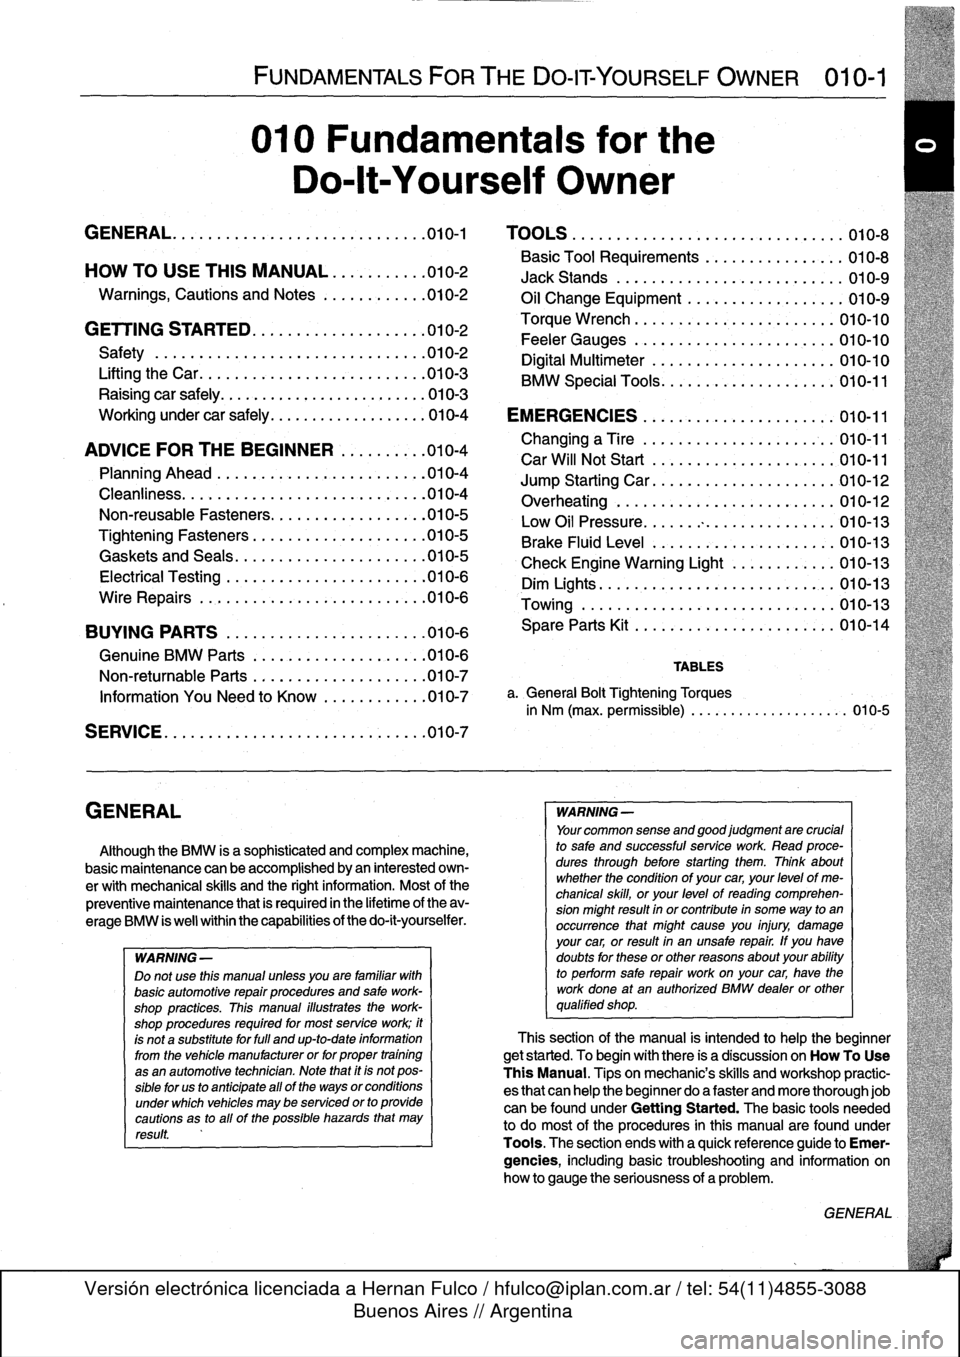 BMW 323i 1995 E36 Workshop Manual 
GENERAL

FUNDAMENTALS
FORTHE
DO-IT
YOURSELF
OWNER

	

010-1

010
Fundamentals
for
the

Do-lt-Yourself
Owner

GENERAL
.......
.
.
.
......
.
.........
.
.
.010-1

	

TOOLS
.
.
...
.
............
.
...